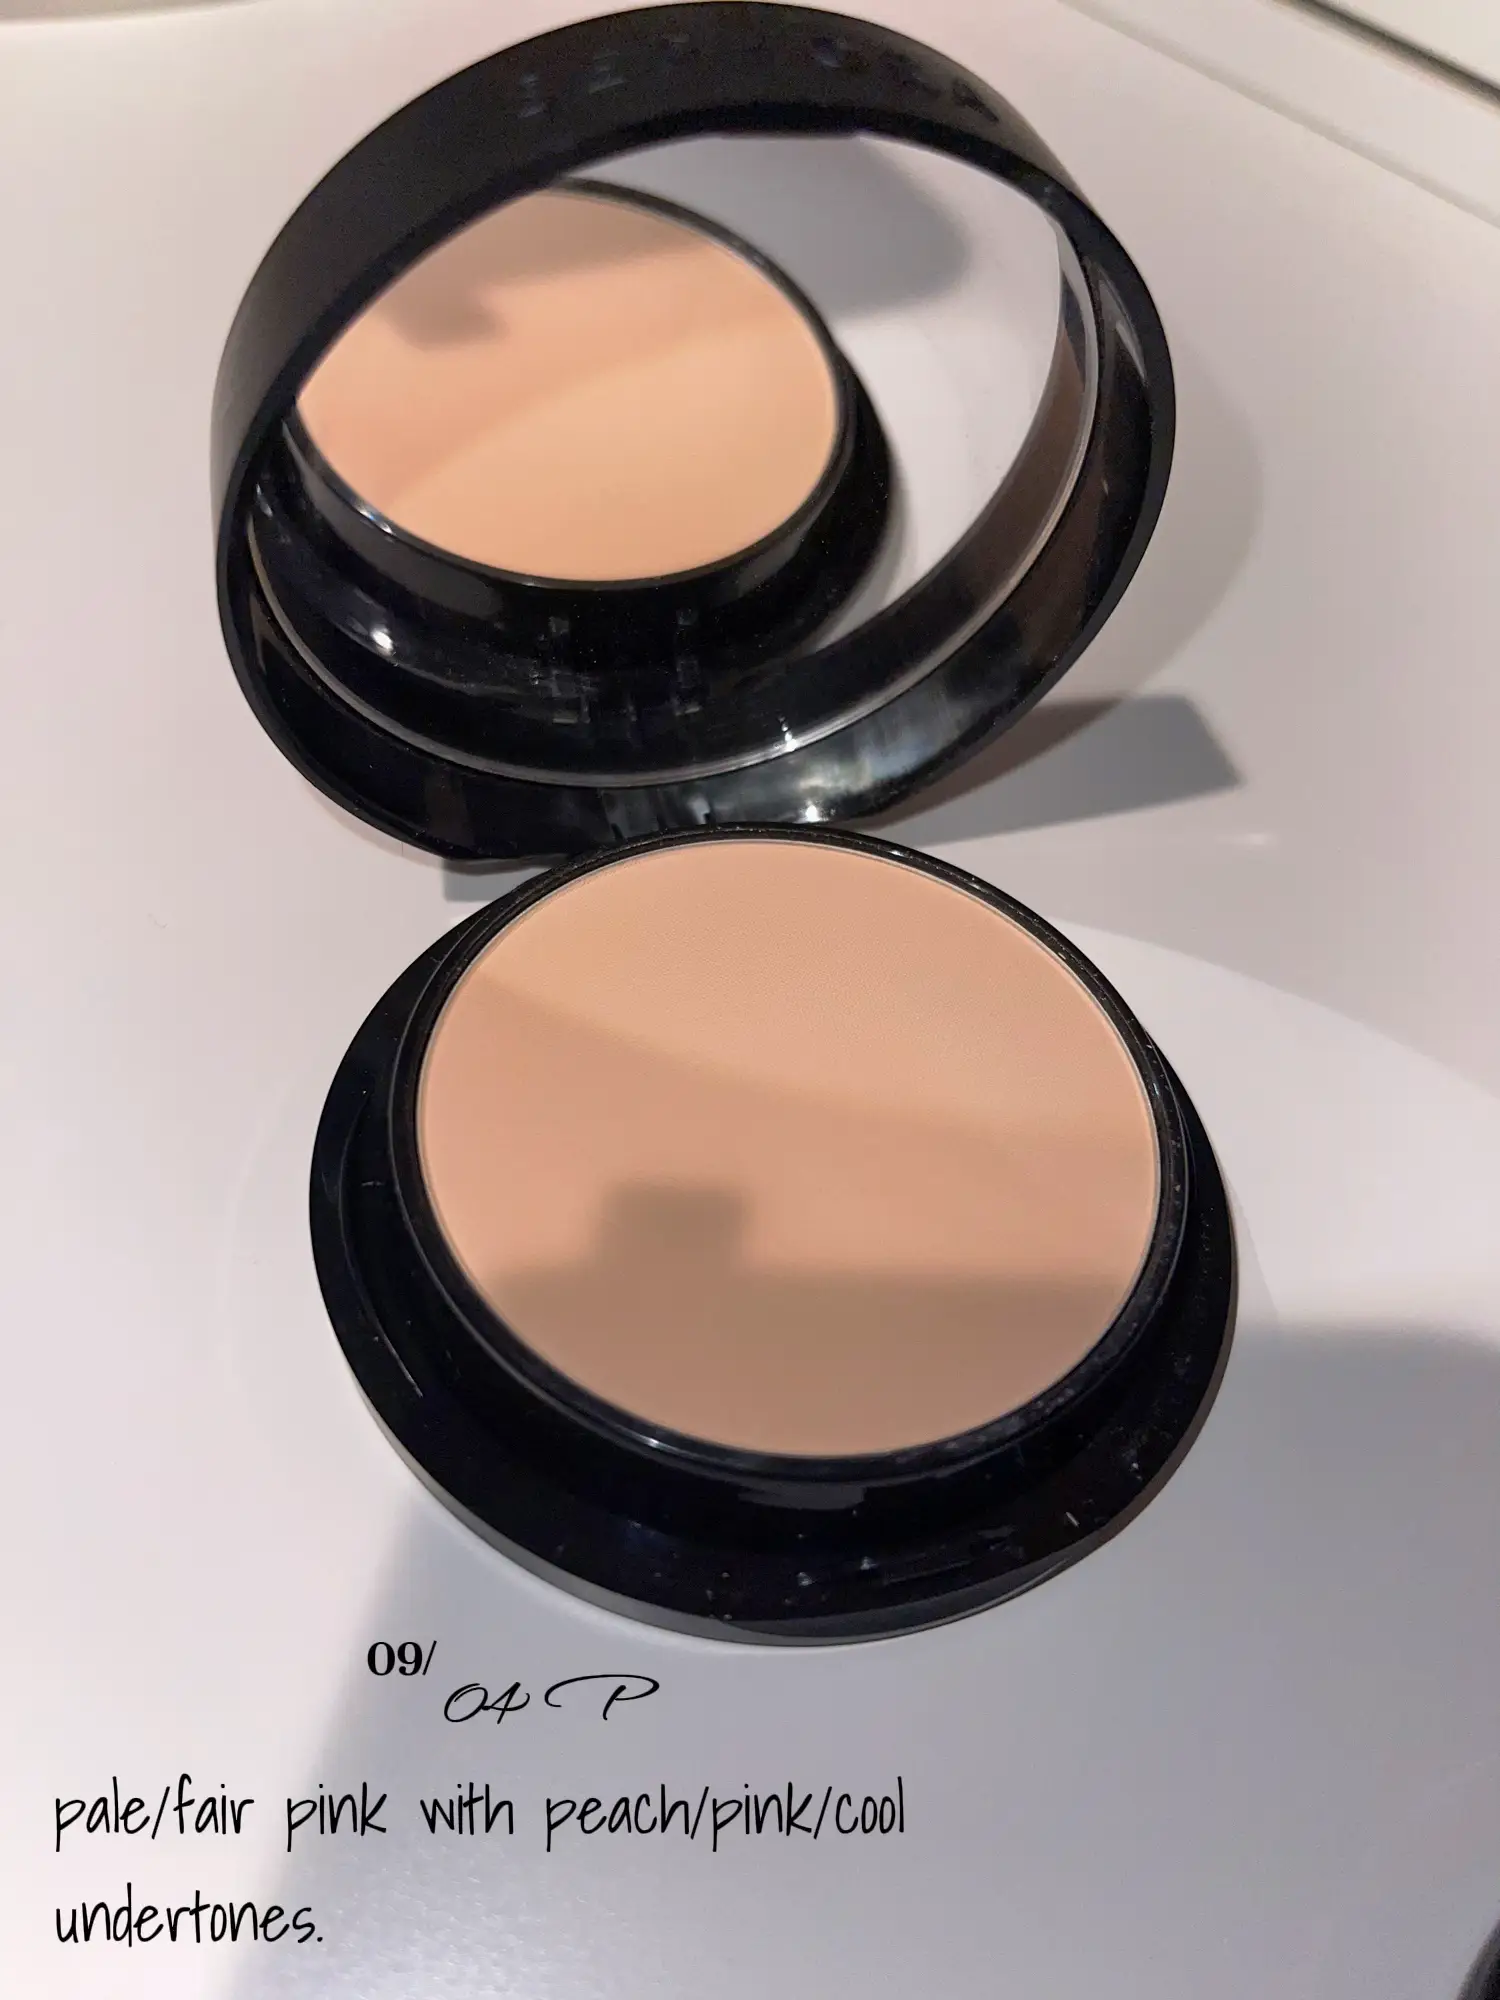 18 top best powder in a glowy for oily 2024 ideas finish foundation skin with